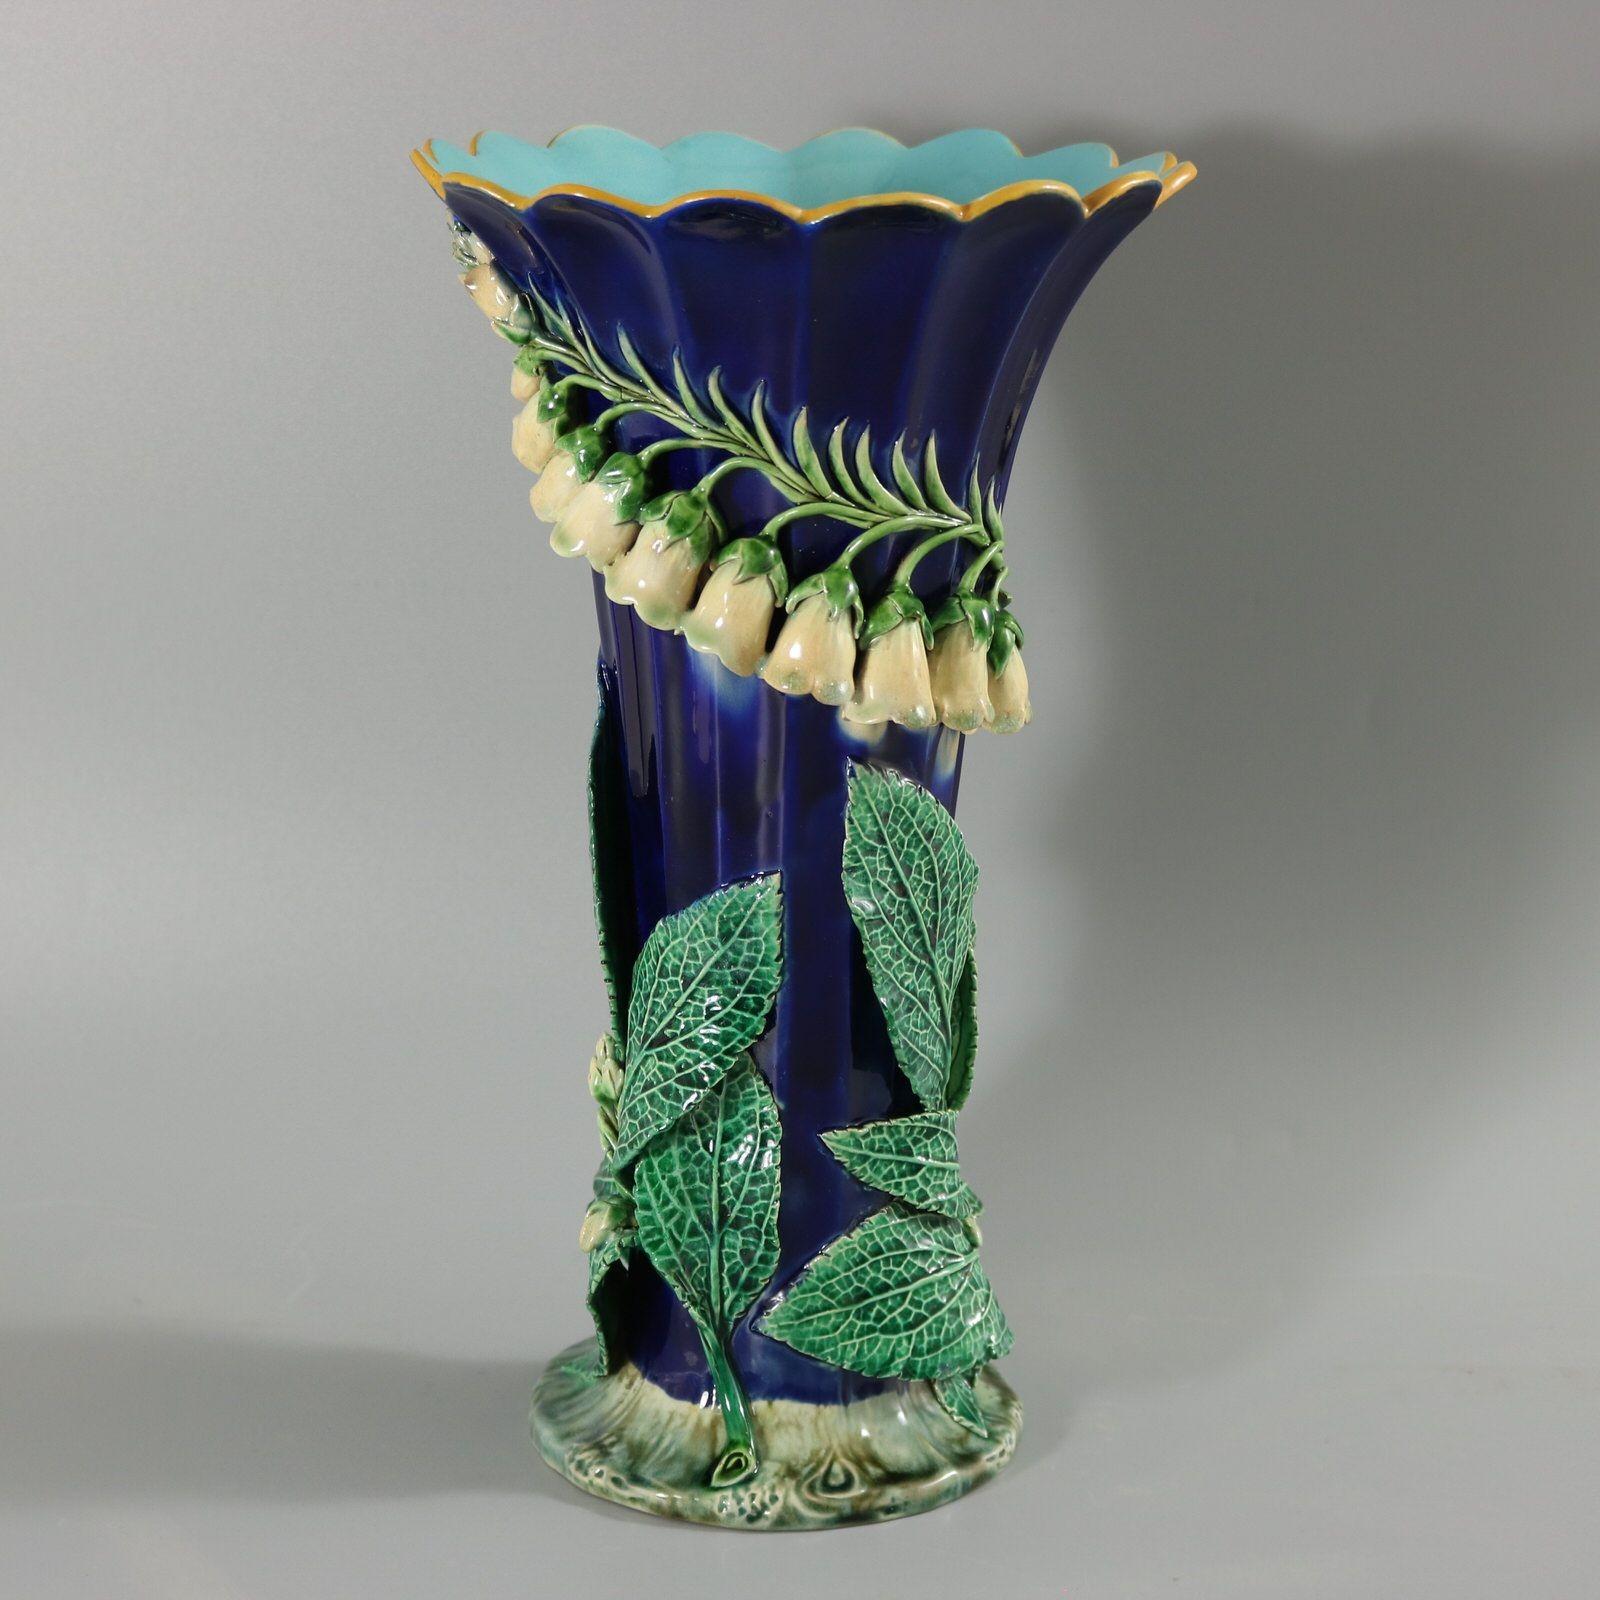 Minton Majolica vase which features foxglove flowers and leaves in deep relief. Colouration: cobalt blue, green, white, are predominant. The piece bears maker's marks for the Minton pottery. Bears a pattern number, '1757'. Marks include a factory